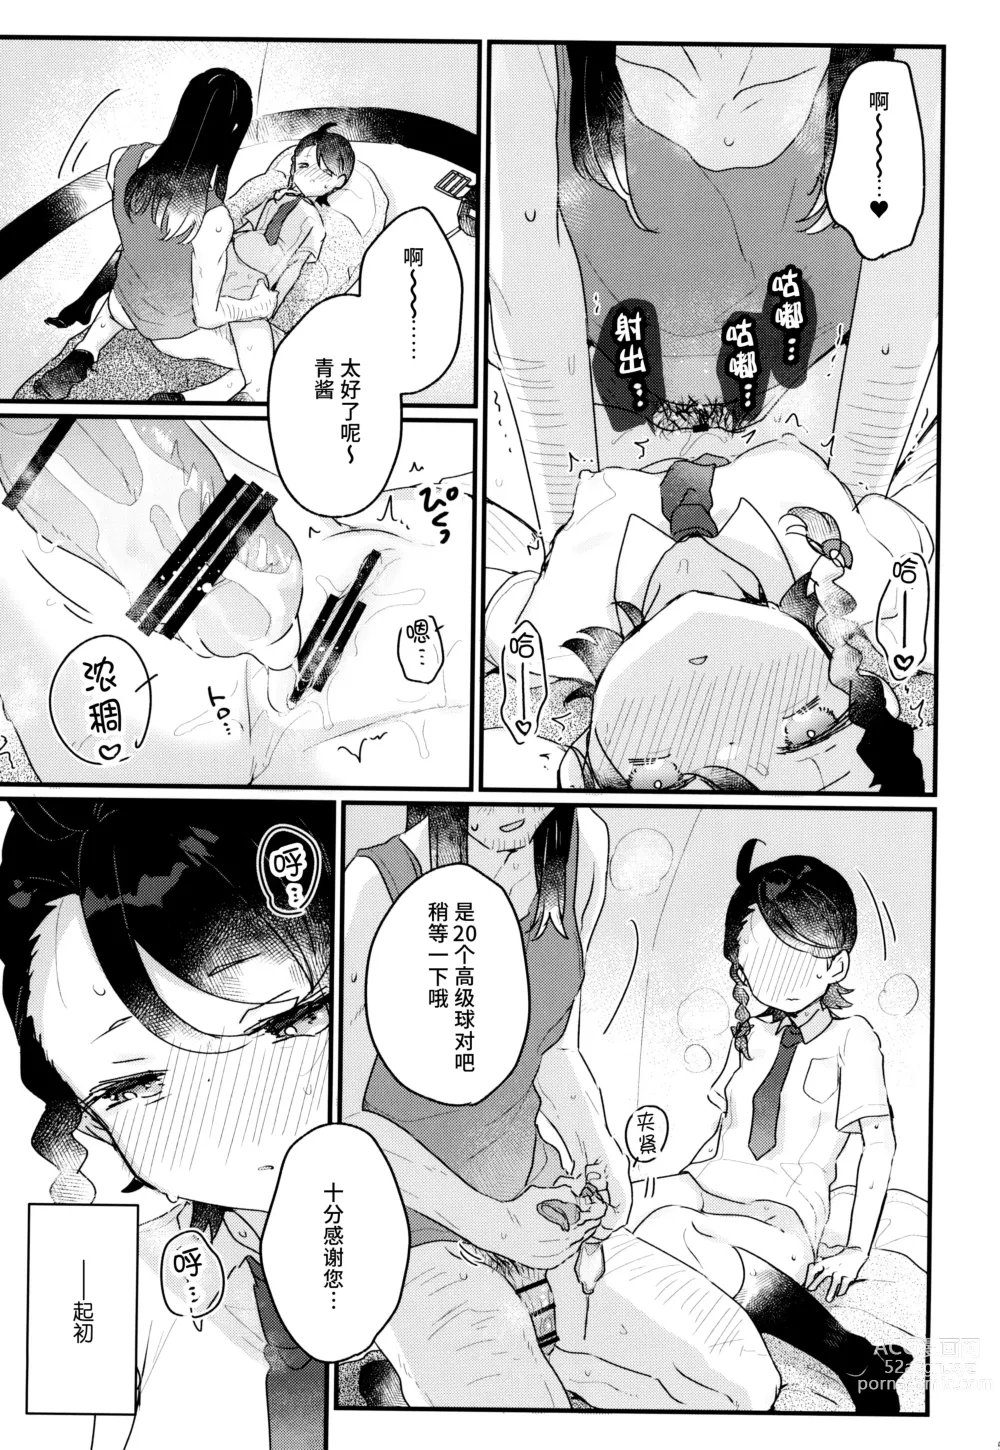 Page 5 of doujinshi 因为零花钱，完全不够用嘛